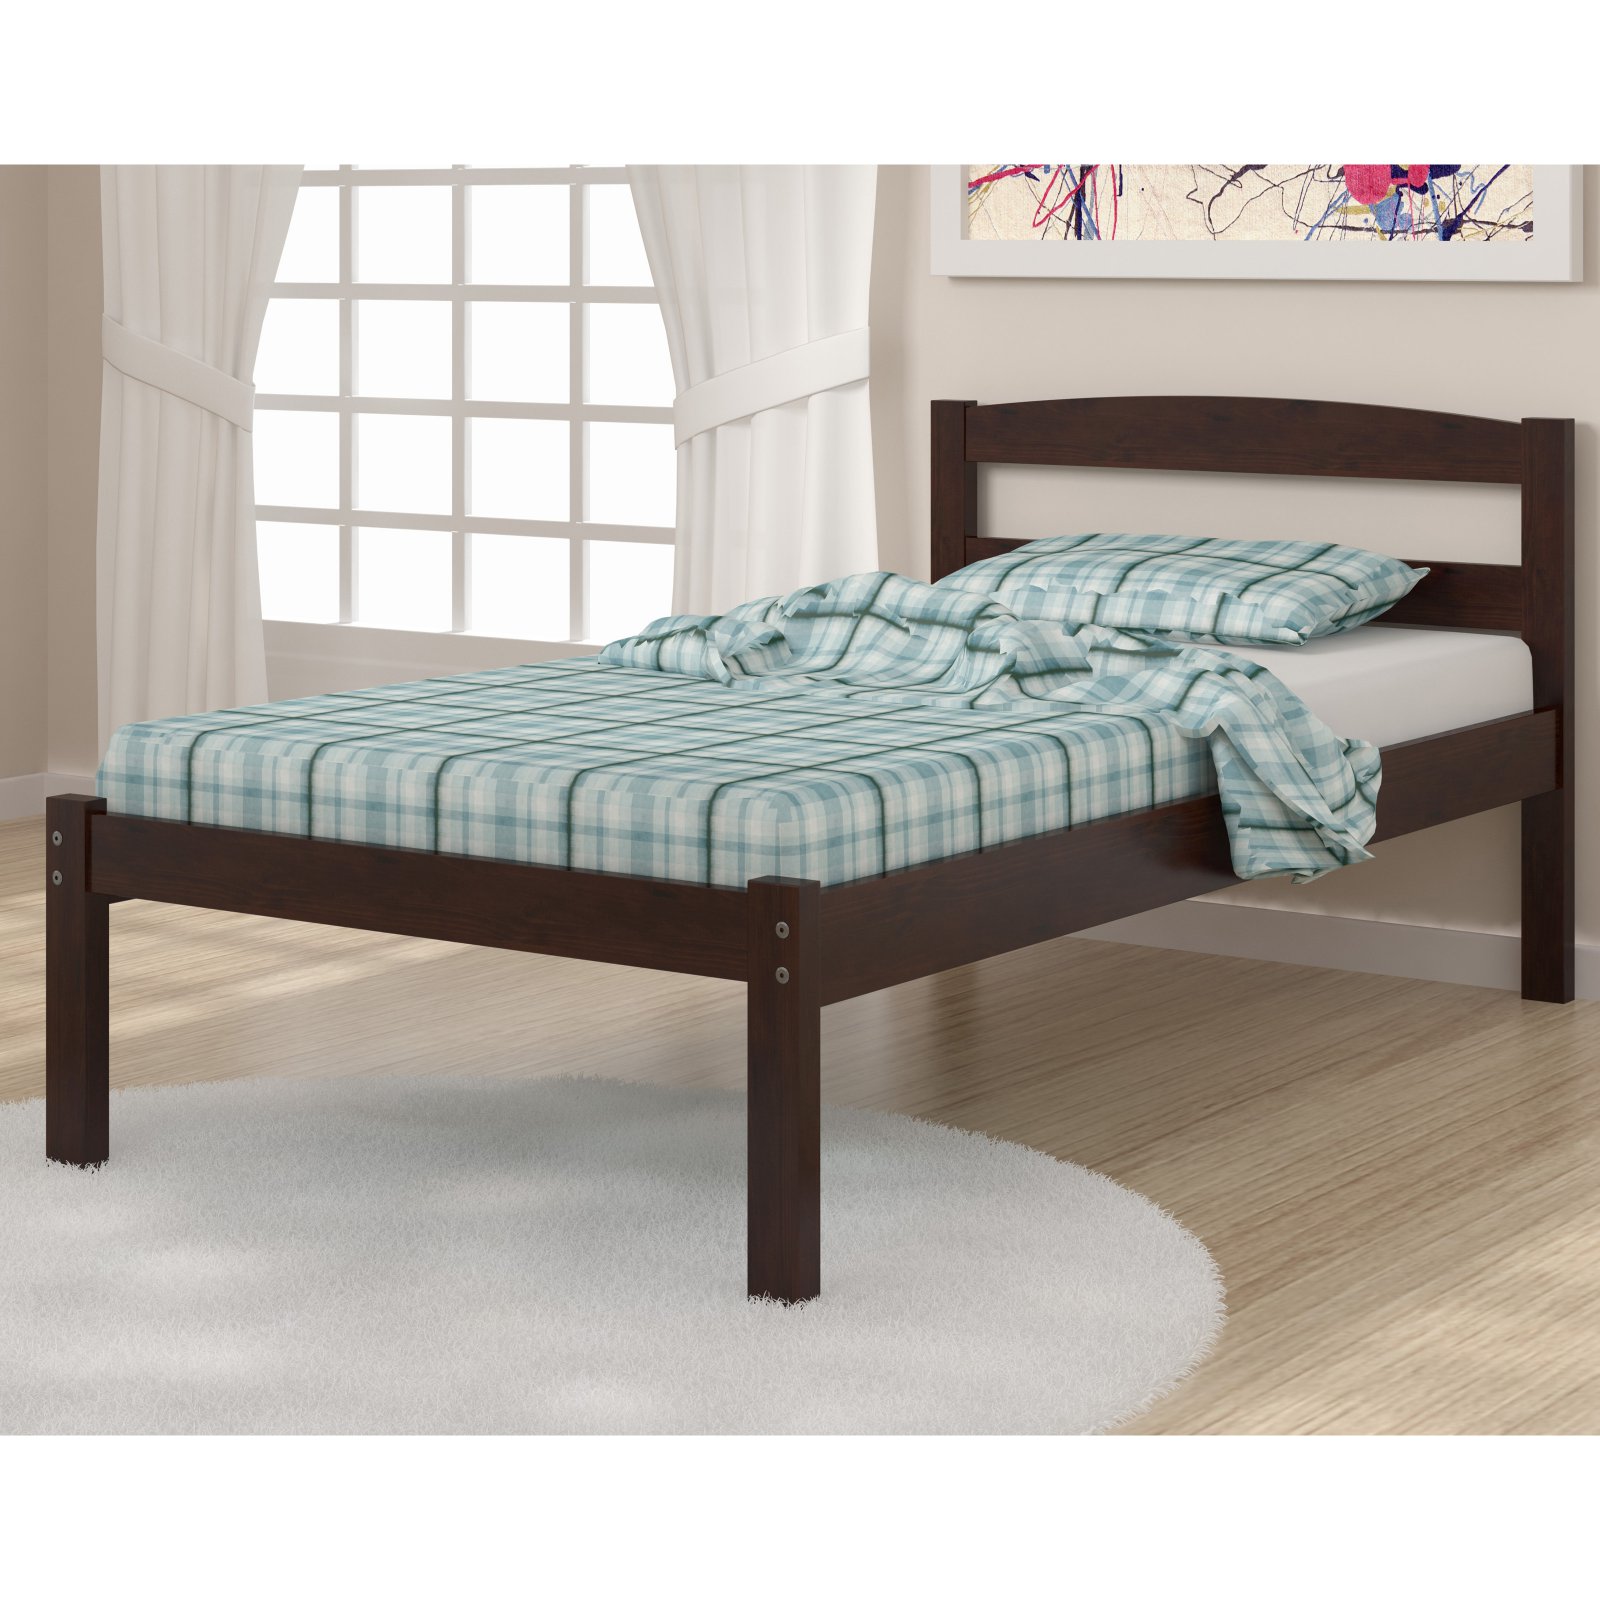 Donco Kids Econo Panel Bed - image 2 of 11